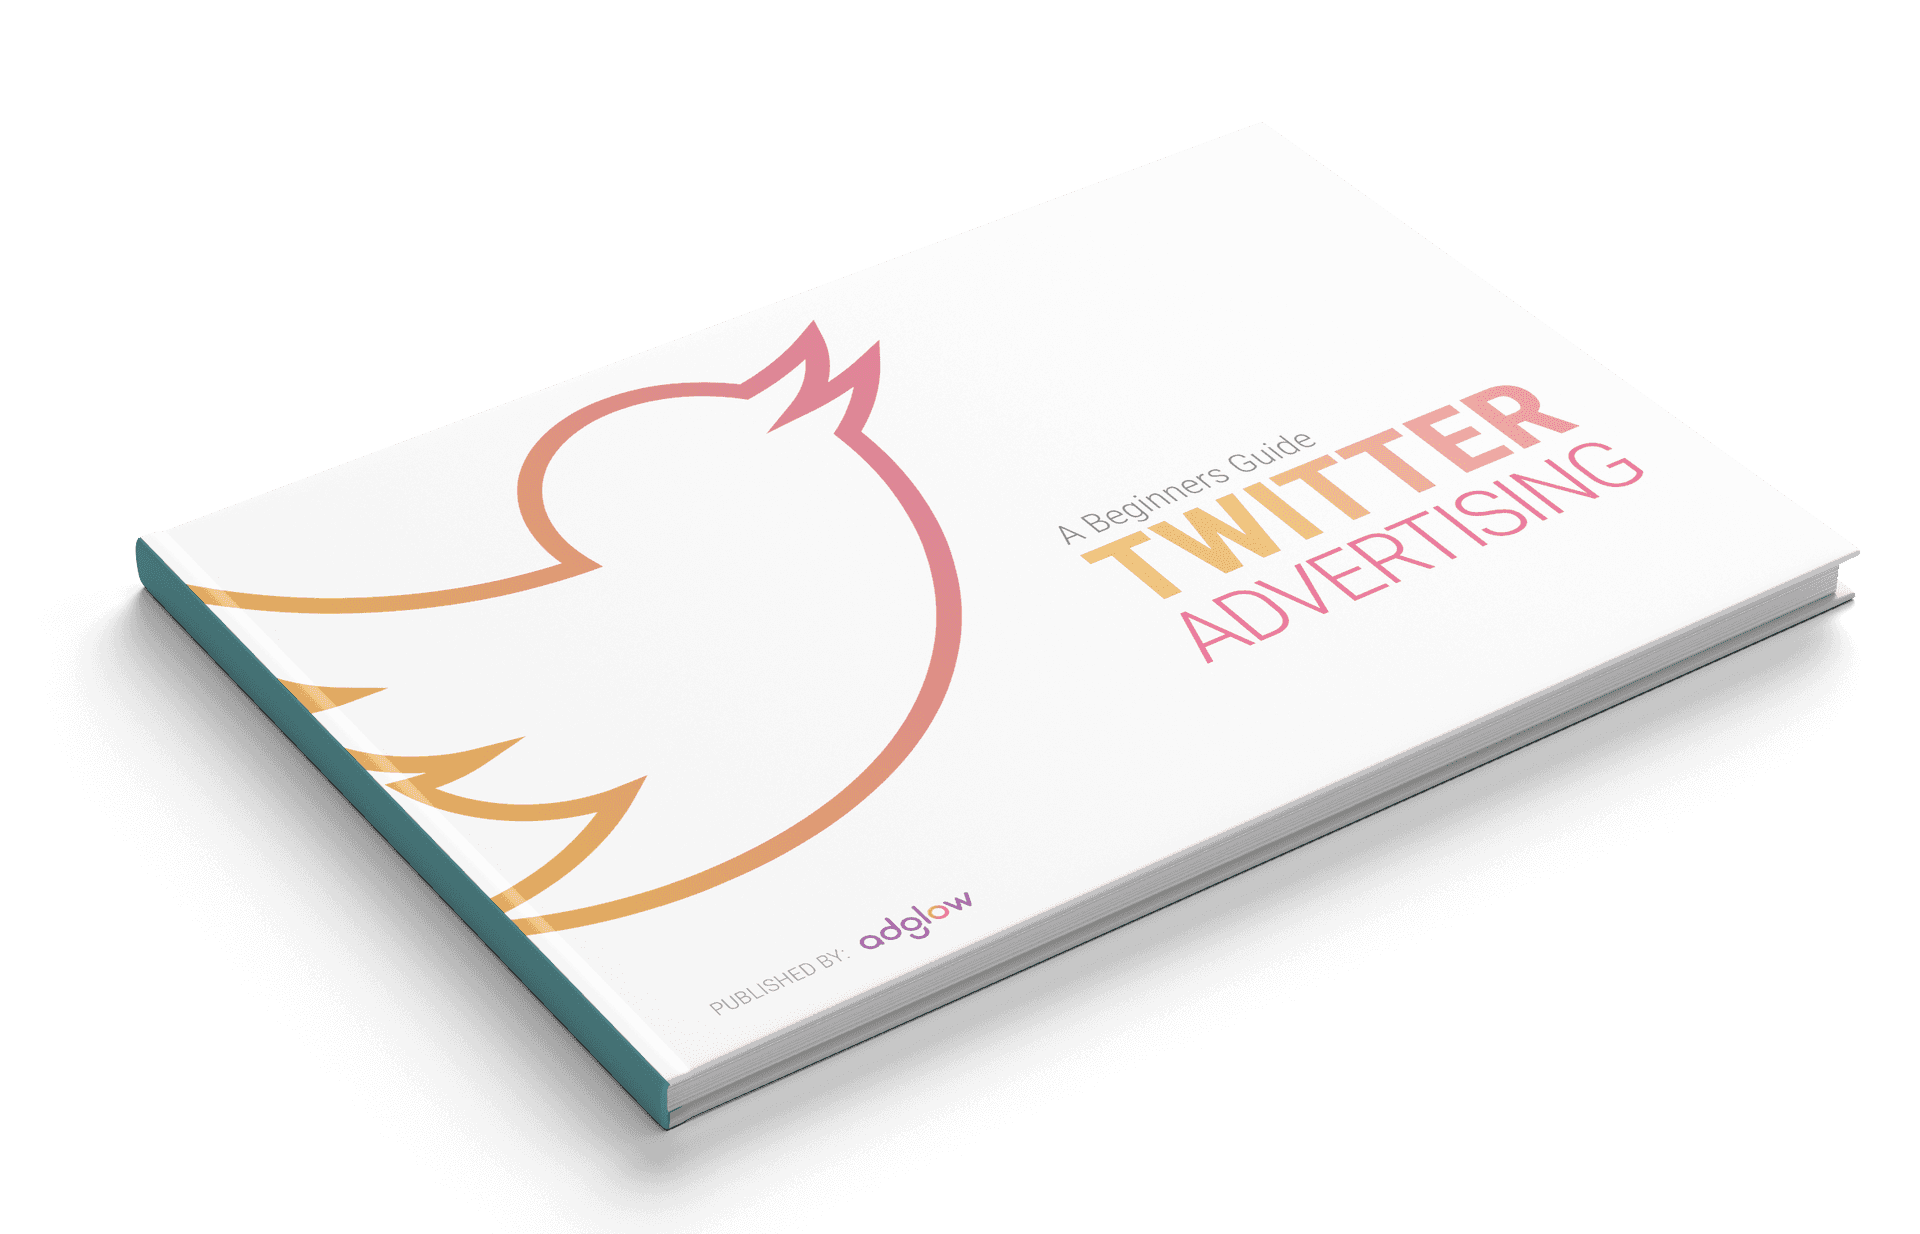 Twitter Advertising Guide Book Cover PNG